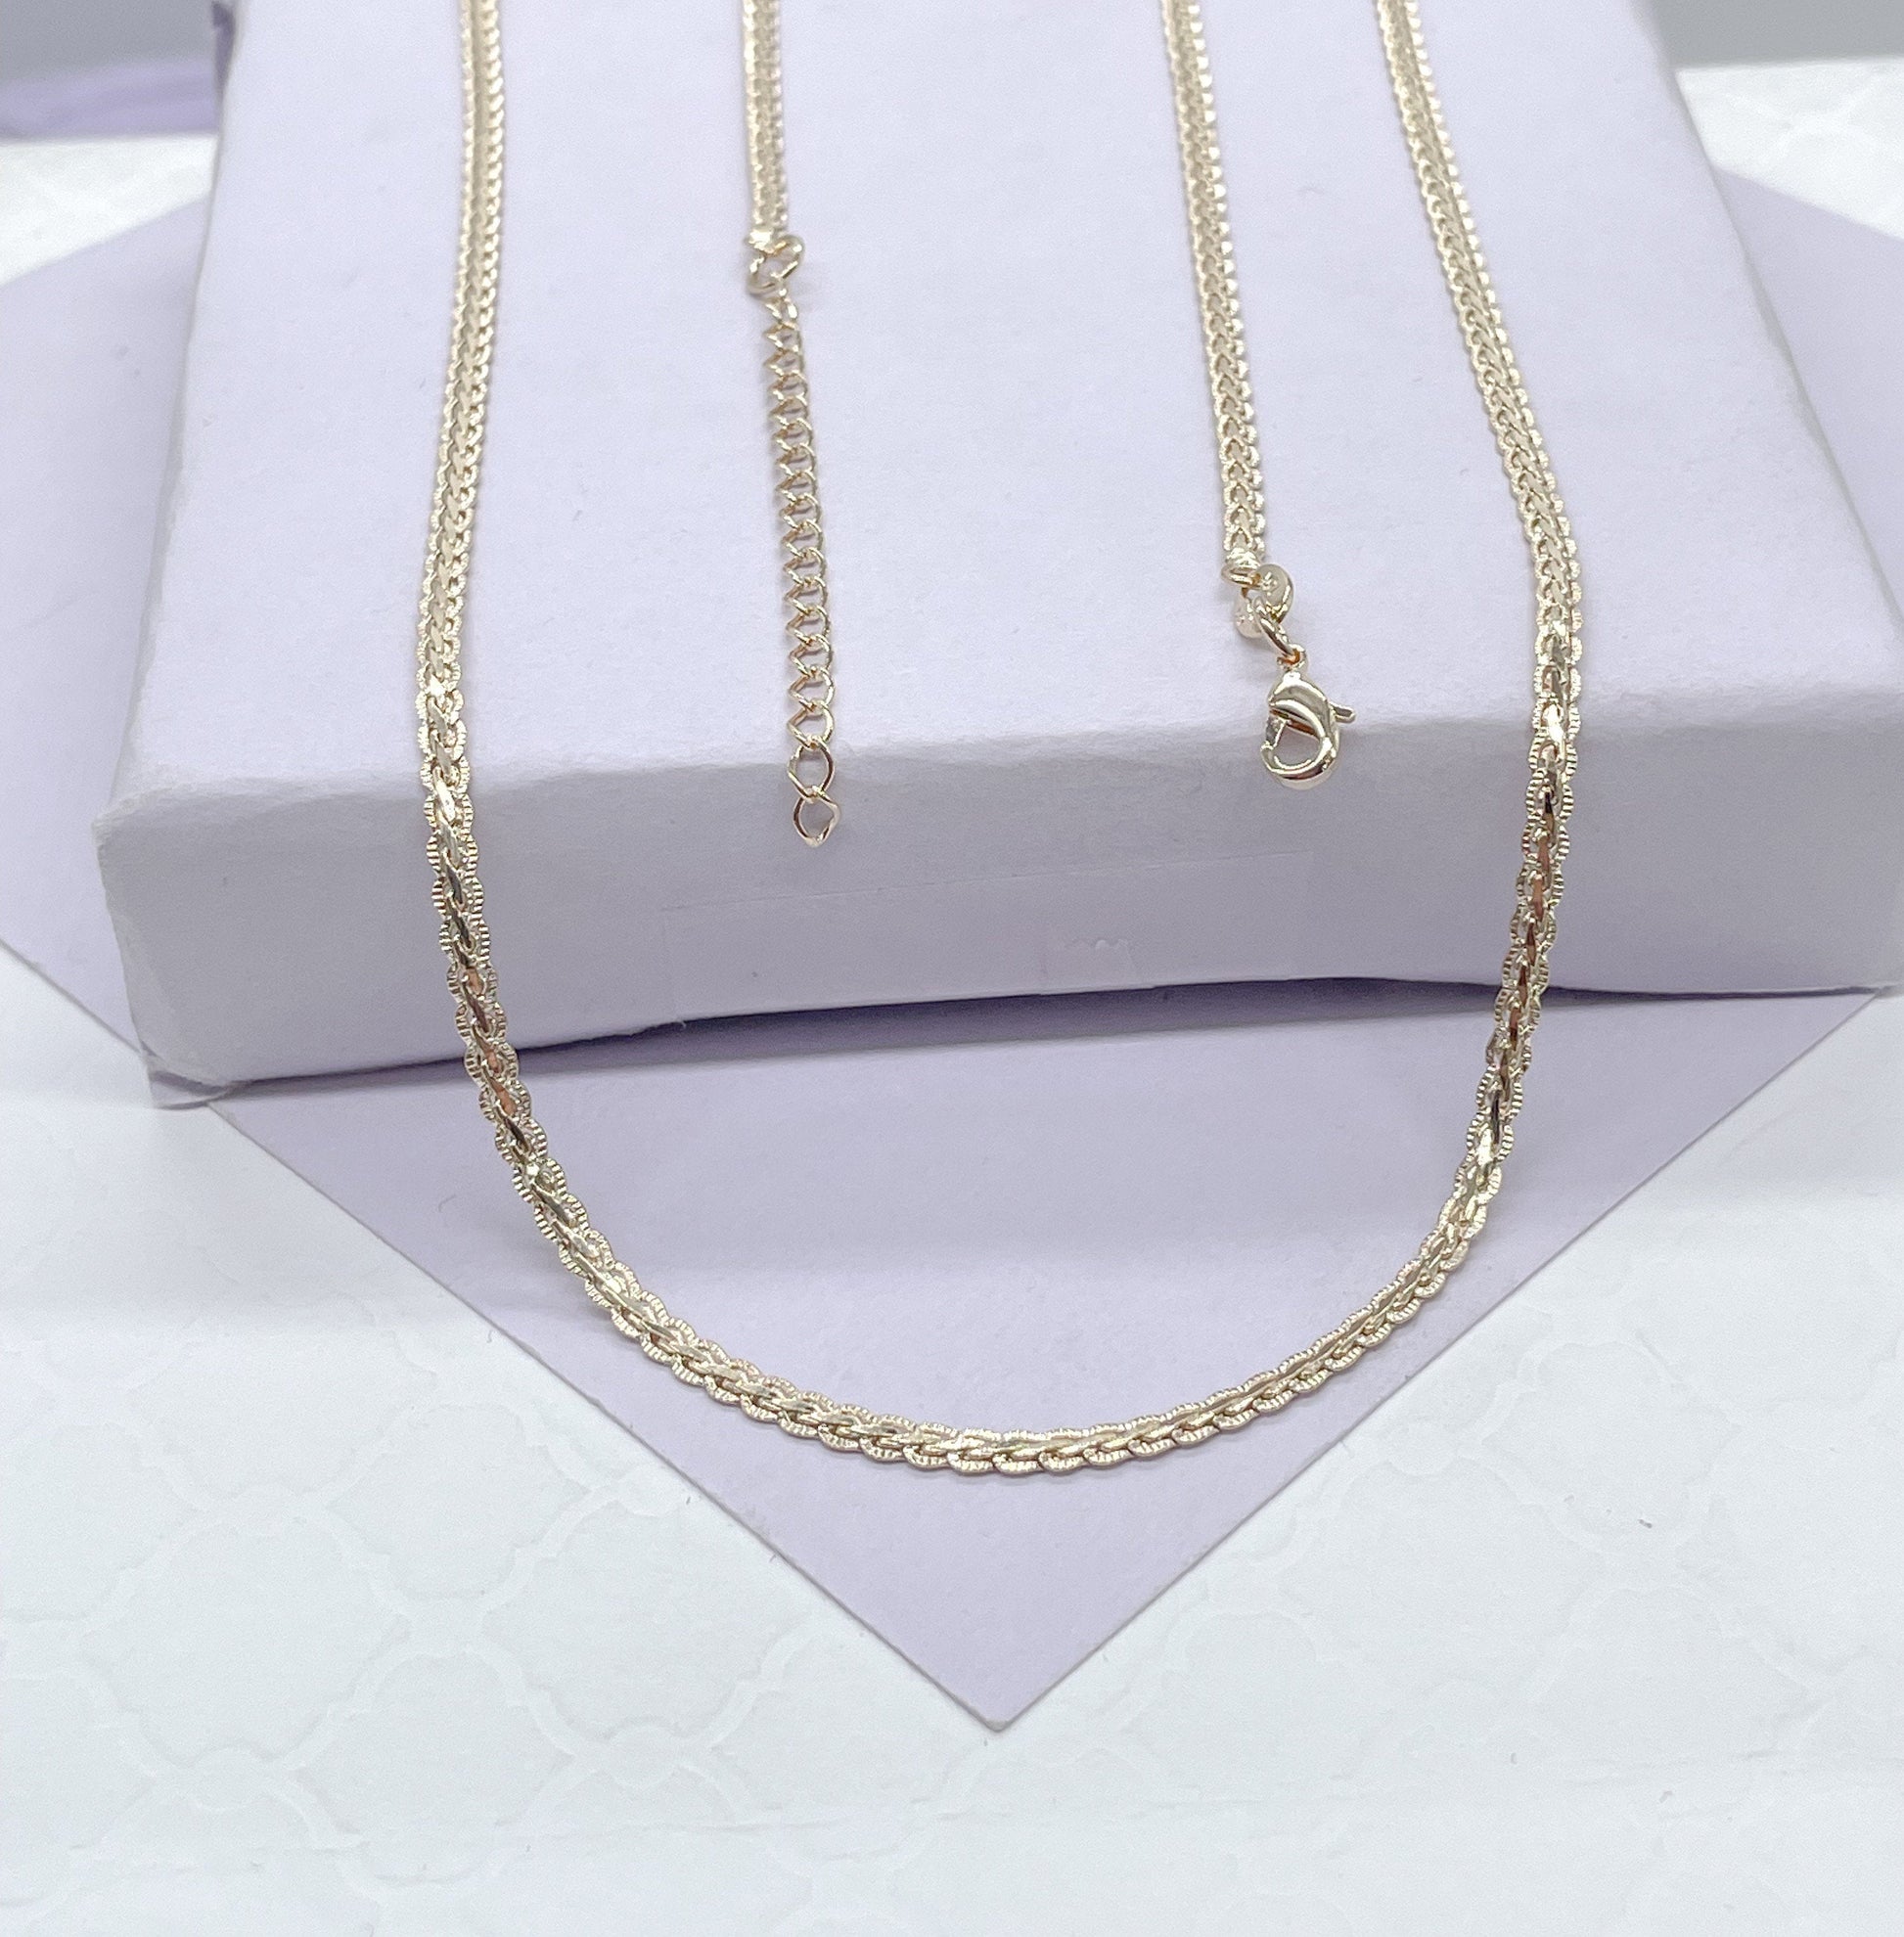 18k Gold Filled 2mm 16 Inch Flat Braid Snake Textured Chain, Necklace For Wholesale, Gift Ideas, Dainty Jewlery, Layering Necklace,